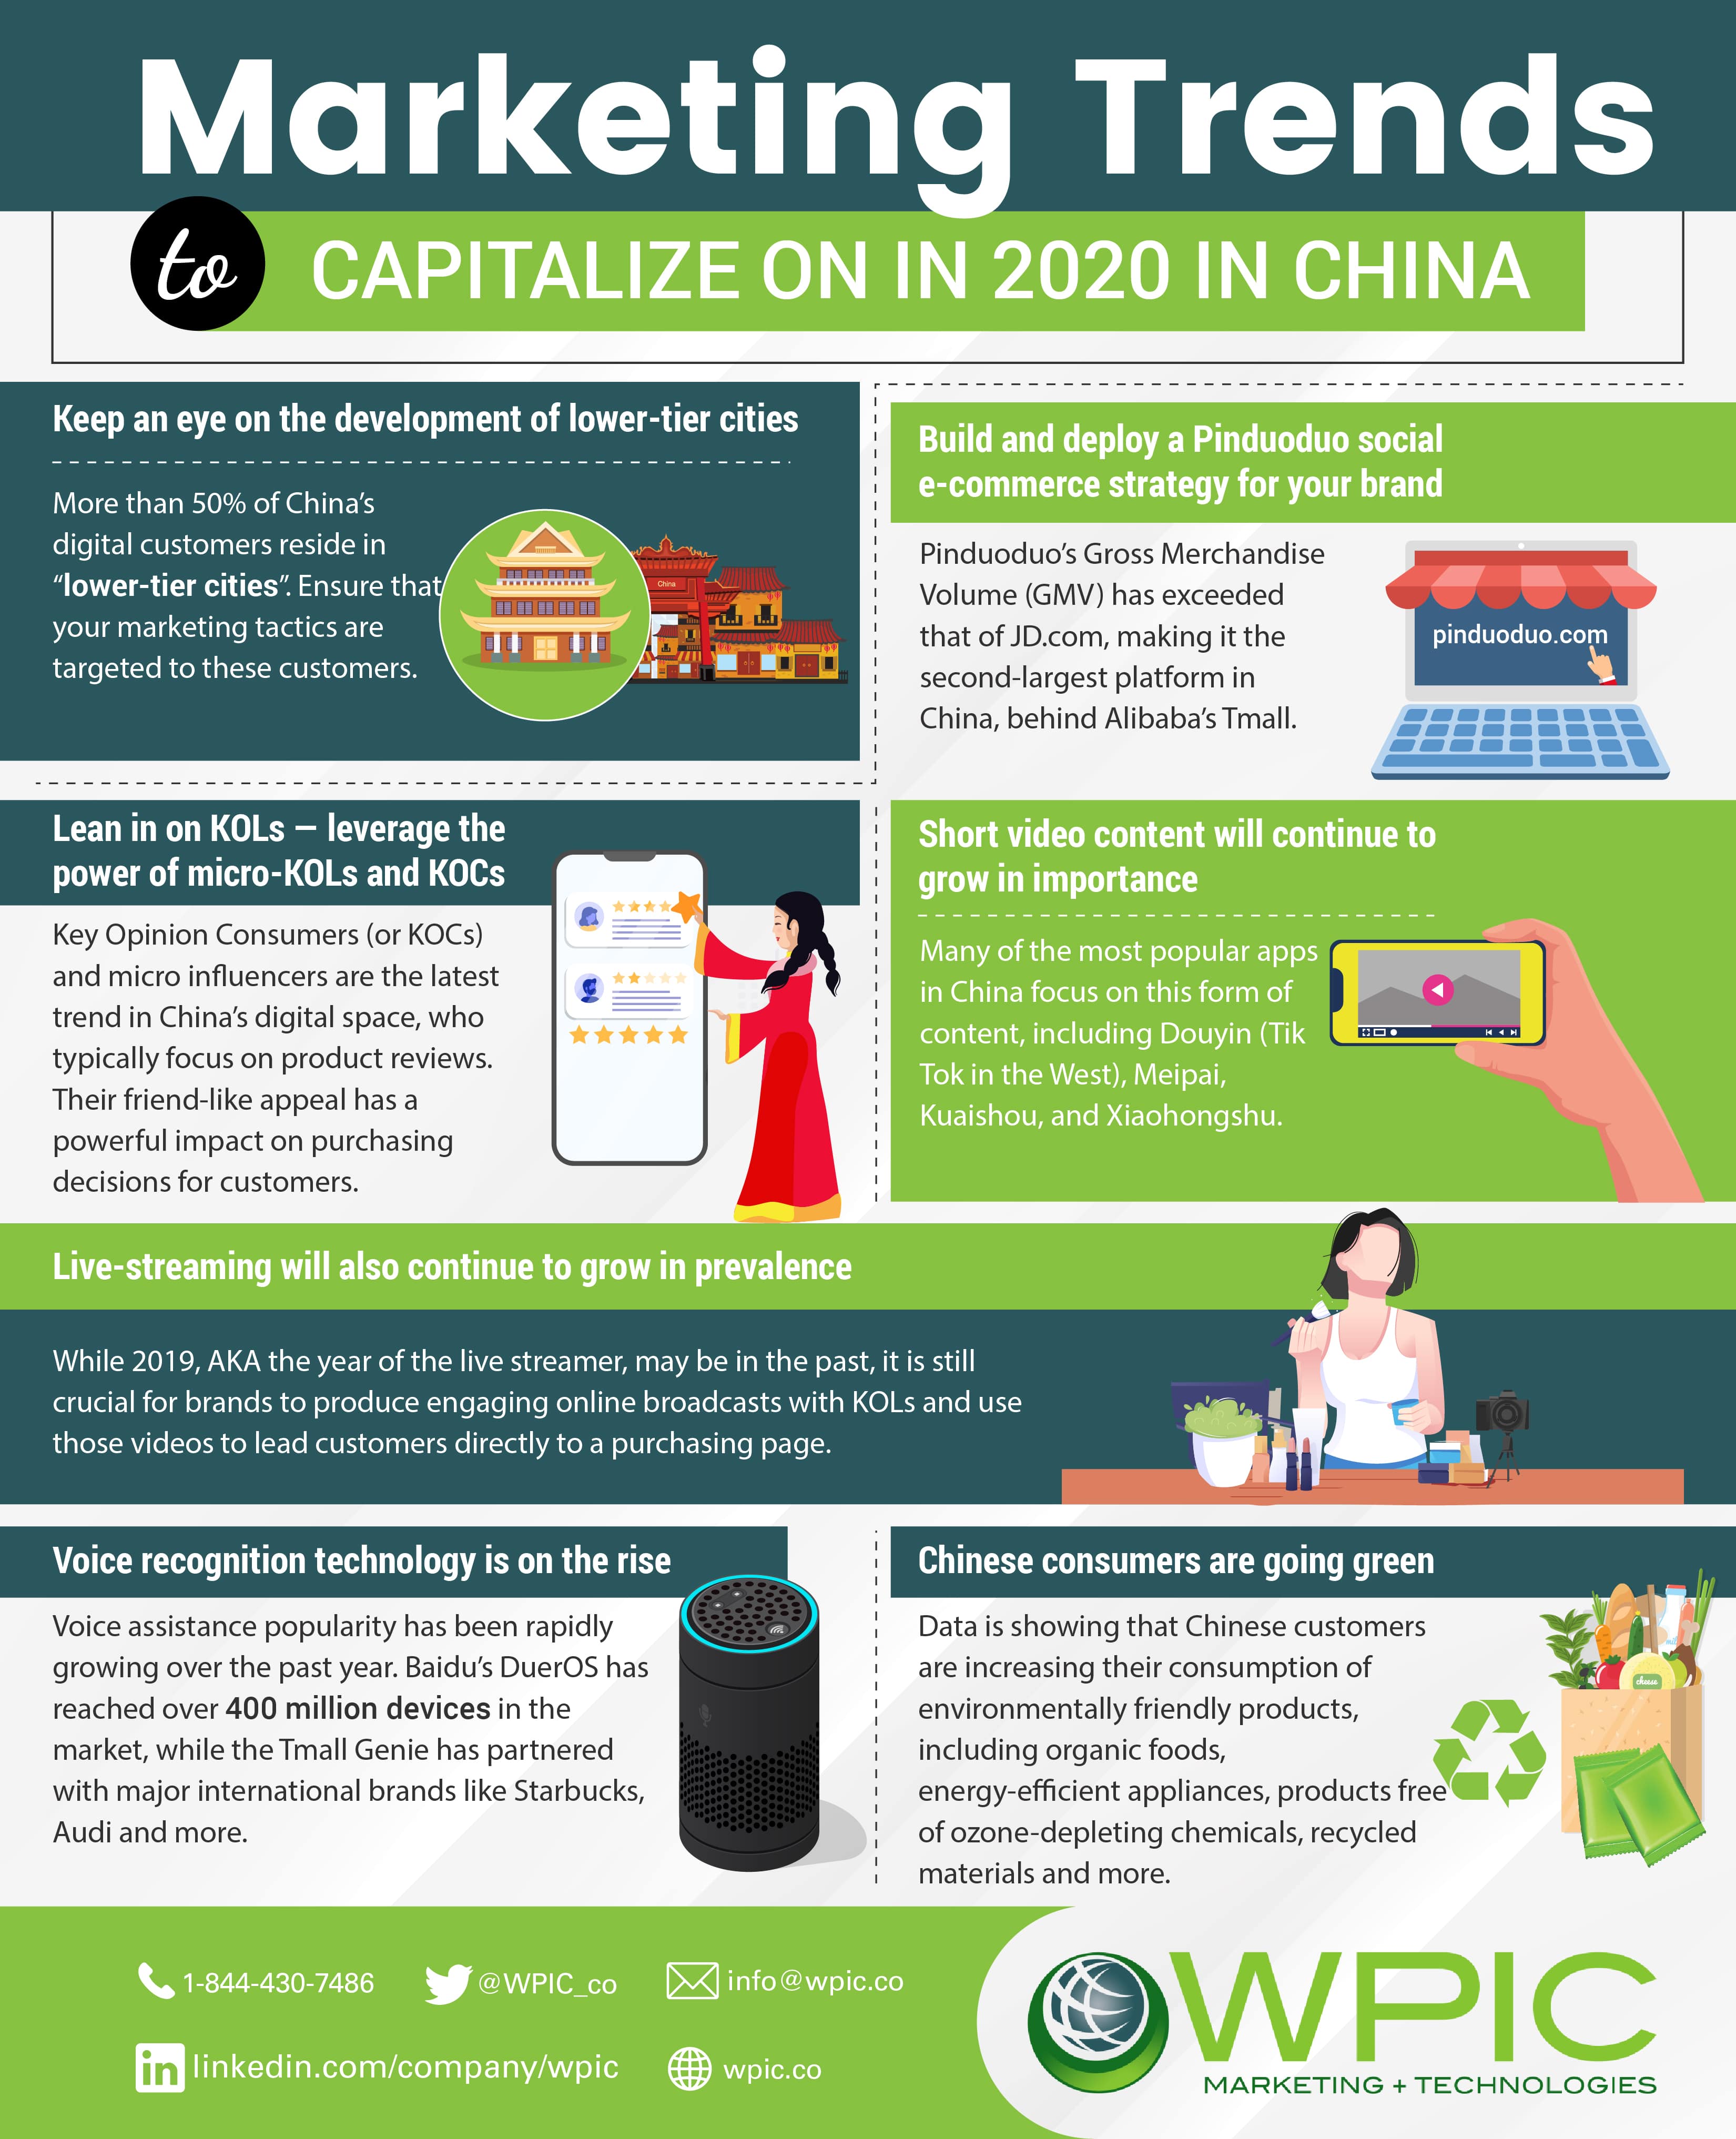 Marketing trends to capitalize on in 2020 in China infographic